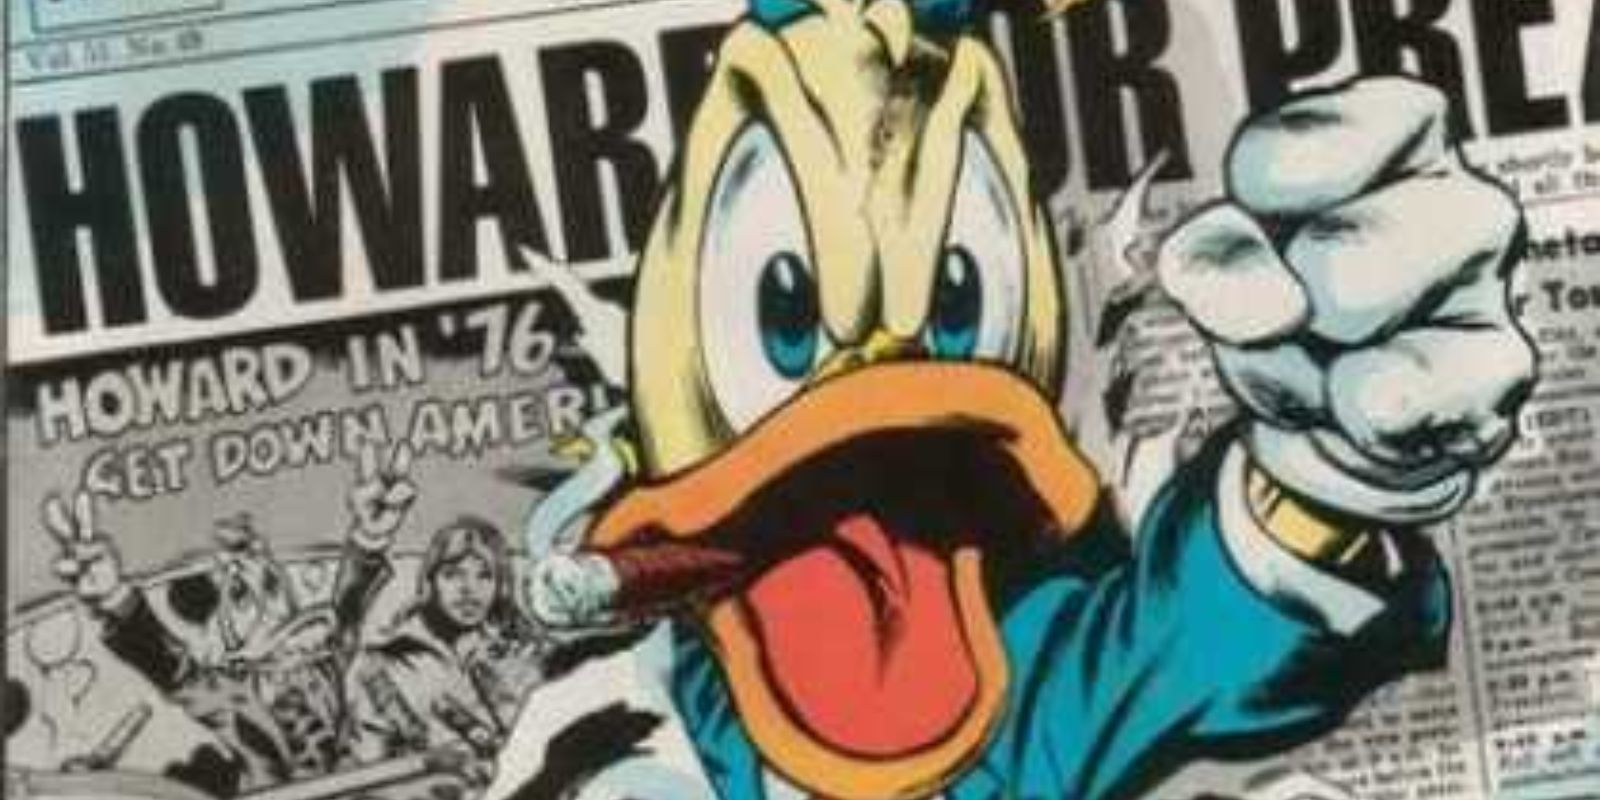 An image of Howard the Duck bursting through a newspaper in Marvel Comics